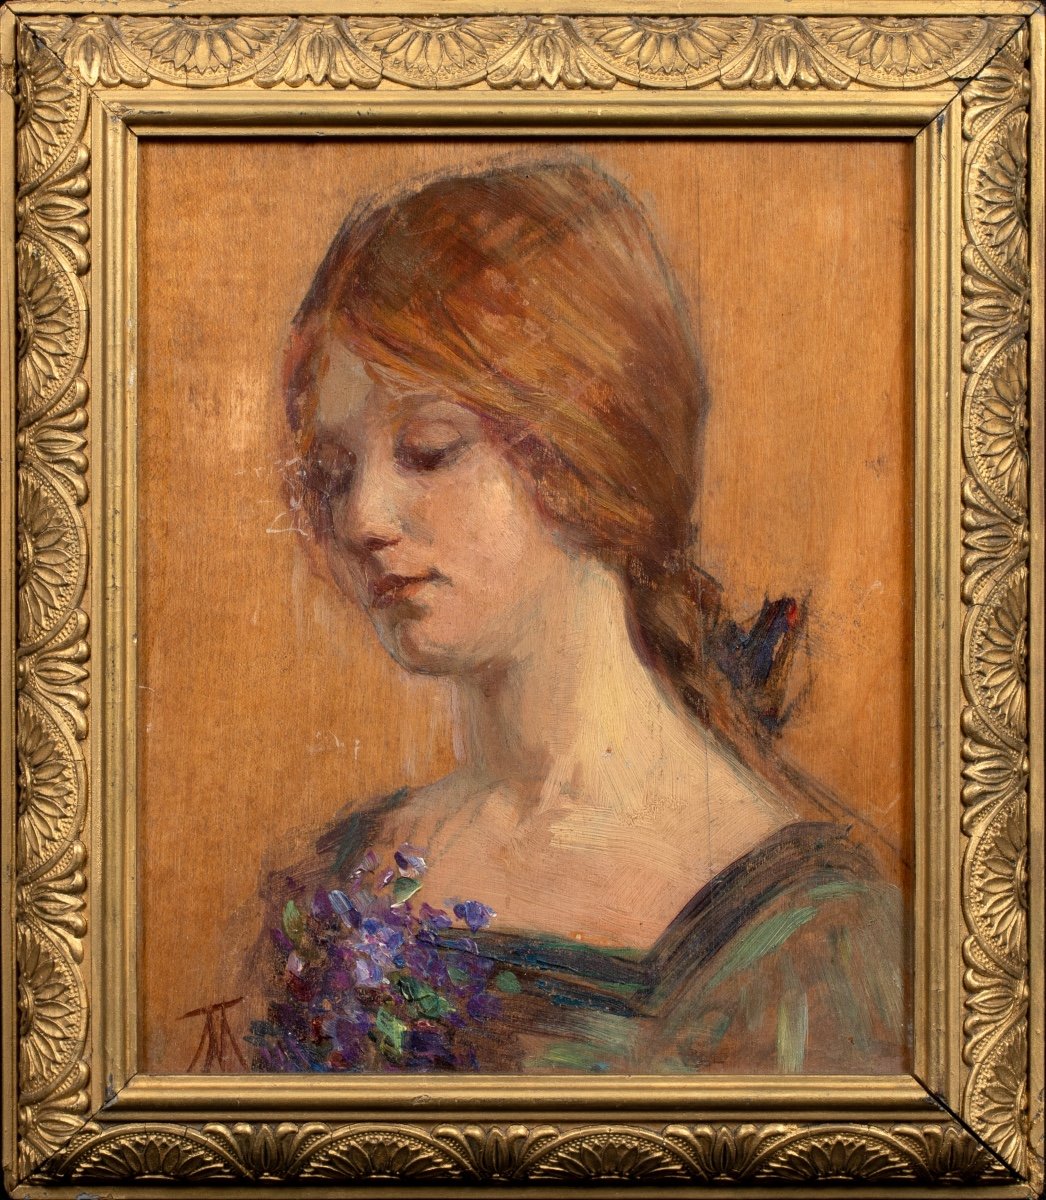 Portrait Of A Redhead Holding Flowers, Circa 1900-photo-2